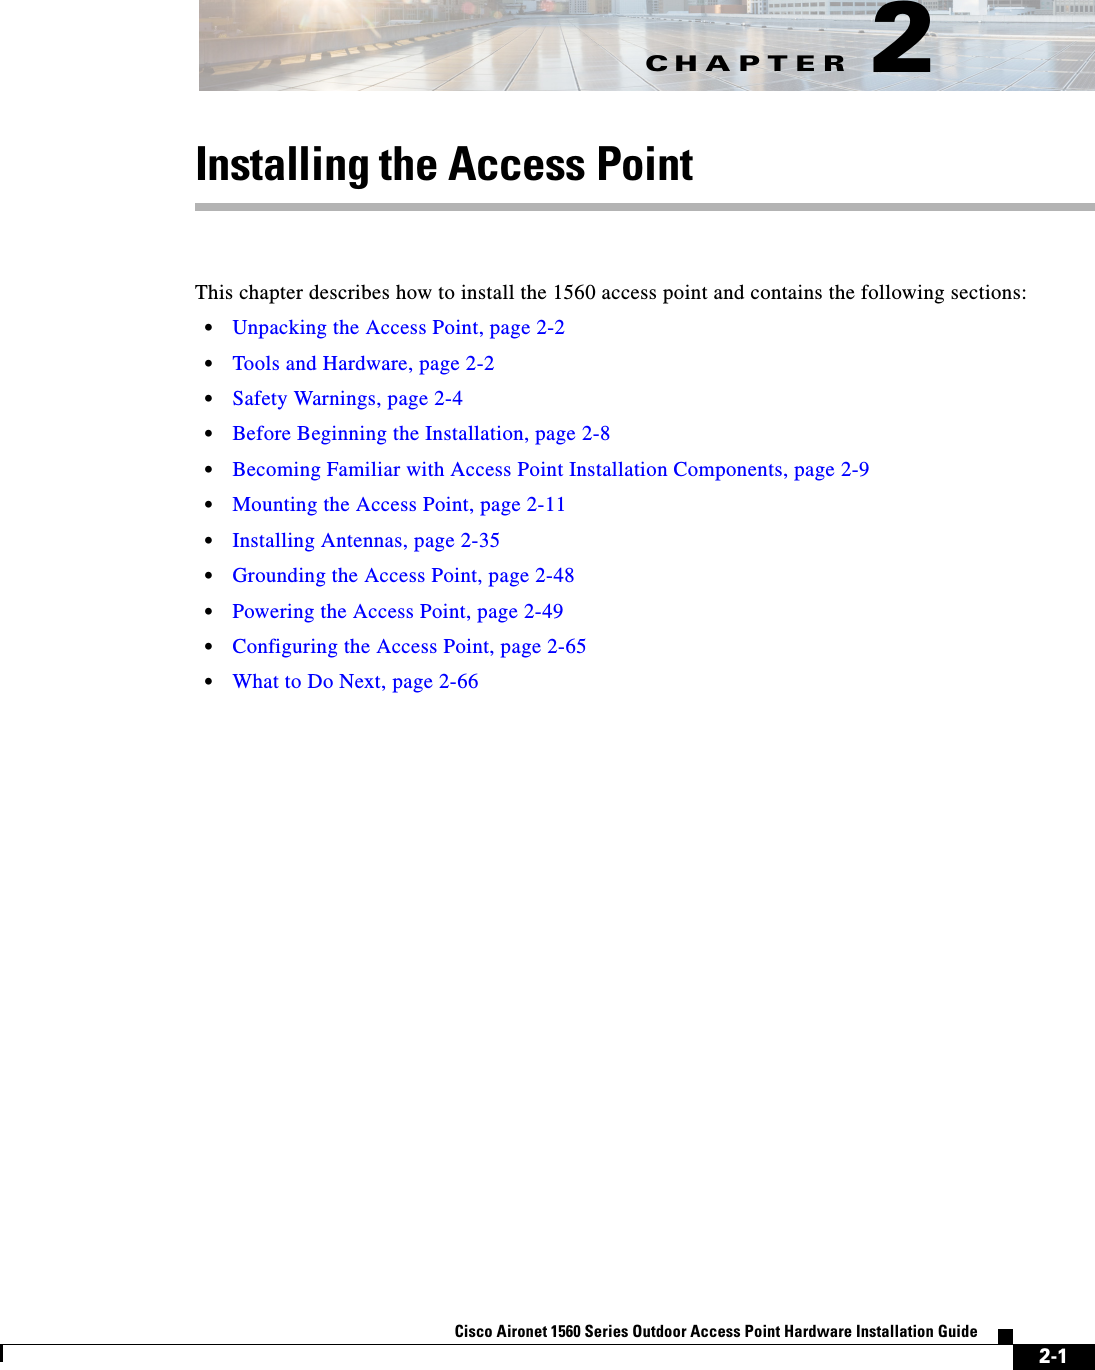 CHAPTER 2-1Cisco Aironet 1560 Series Outdoor Access Point Hardware Installation Guide 2Installing the Access PointThis chapter describes how to install the 1560 access point and contains the following sections:•Unpacking the Access Point, page 2-2•Tools and Hardware, page 2-2•Safety Warnings, page 2-4•Before Beginning the Installation, page 2-8•Becoming Familiar with Access Point Installation Components, page 2-9•Mounting the Access Point, page 2-11•Installing Antennas, page 2-35•Grounding the Access Point, page 2-48•Powering the Access Point, page 2-49•Configuring the Access Point, page 2-65•What to Do Next, page 2-66